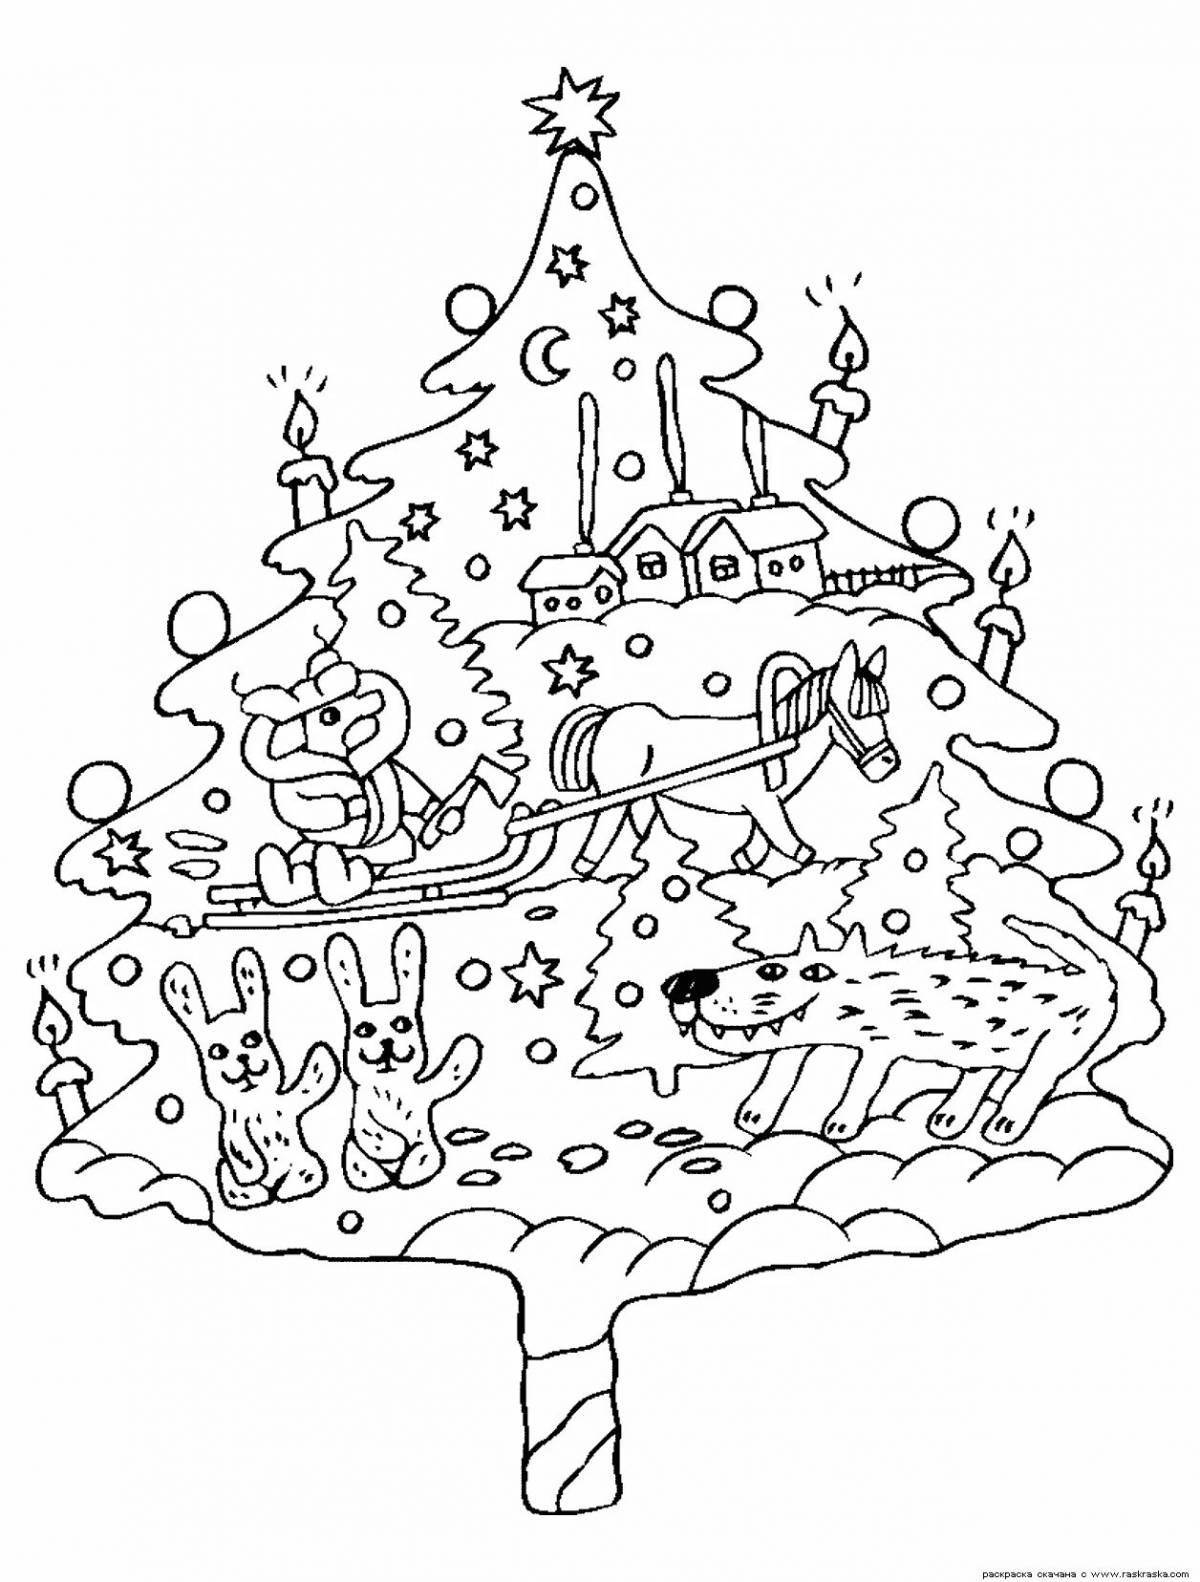 Violent giant tree coloring book